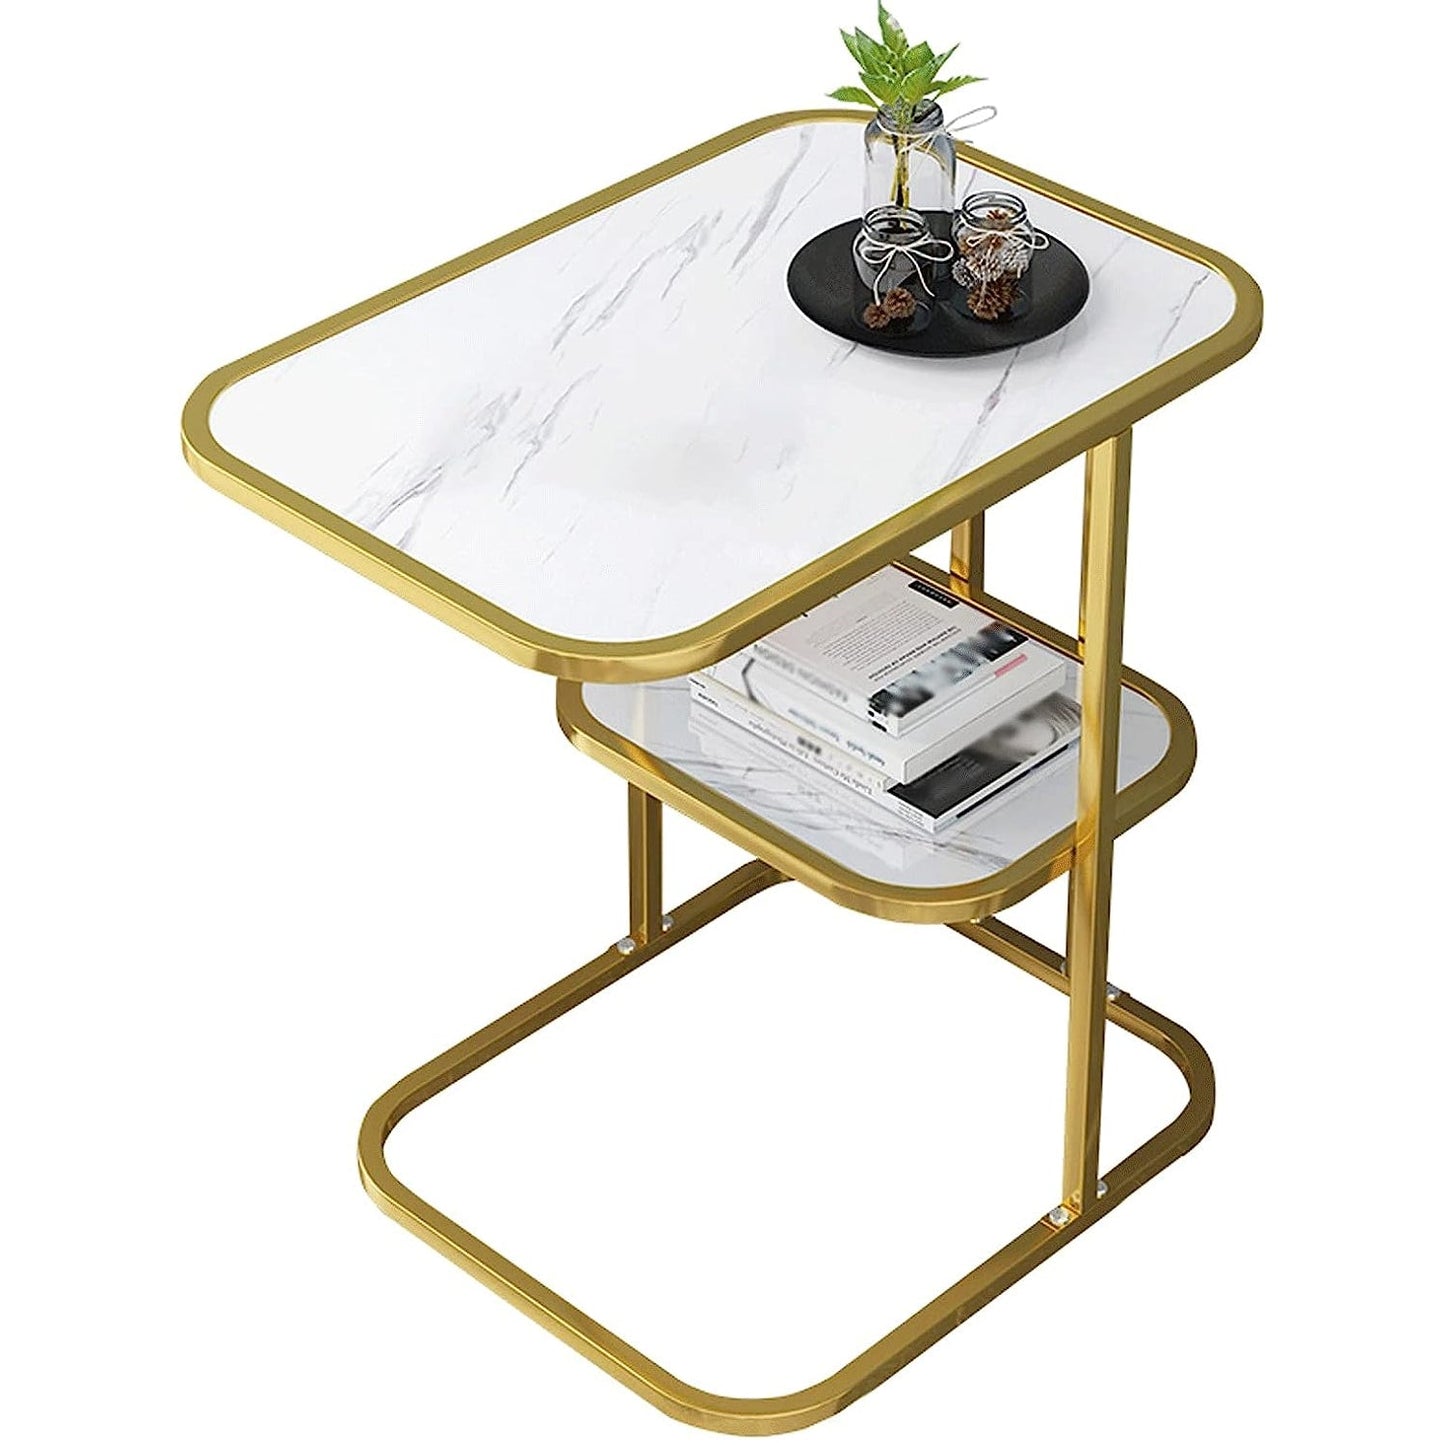 Creative Multi-function 2 Layer Small Table